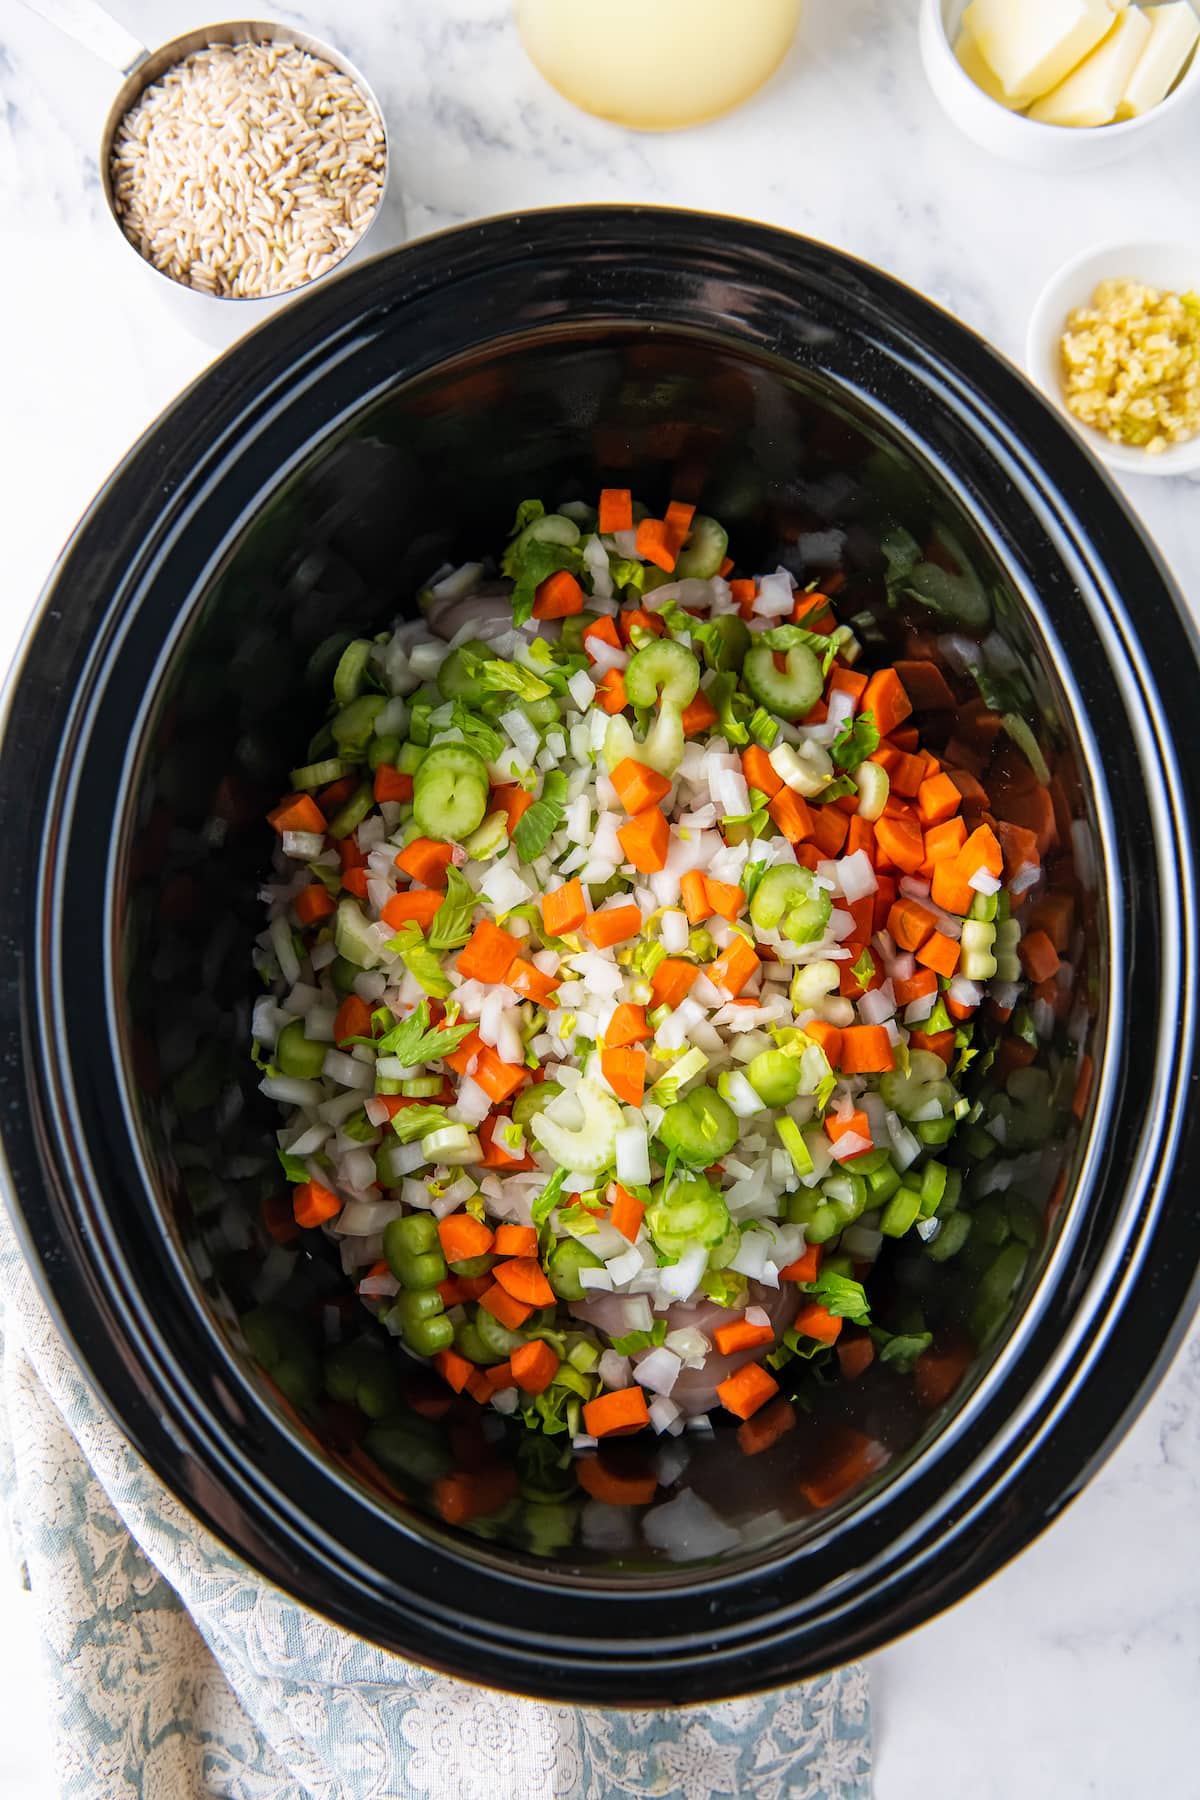 diced vegetables in a crockpot